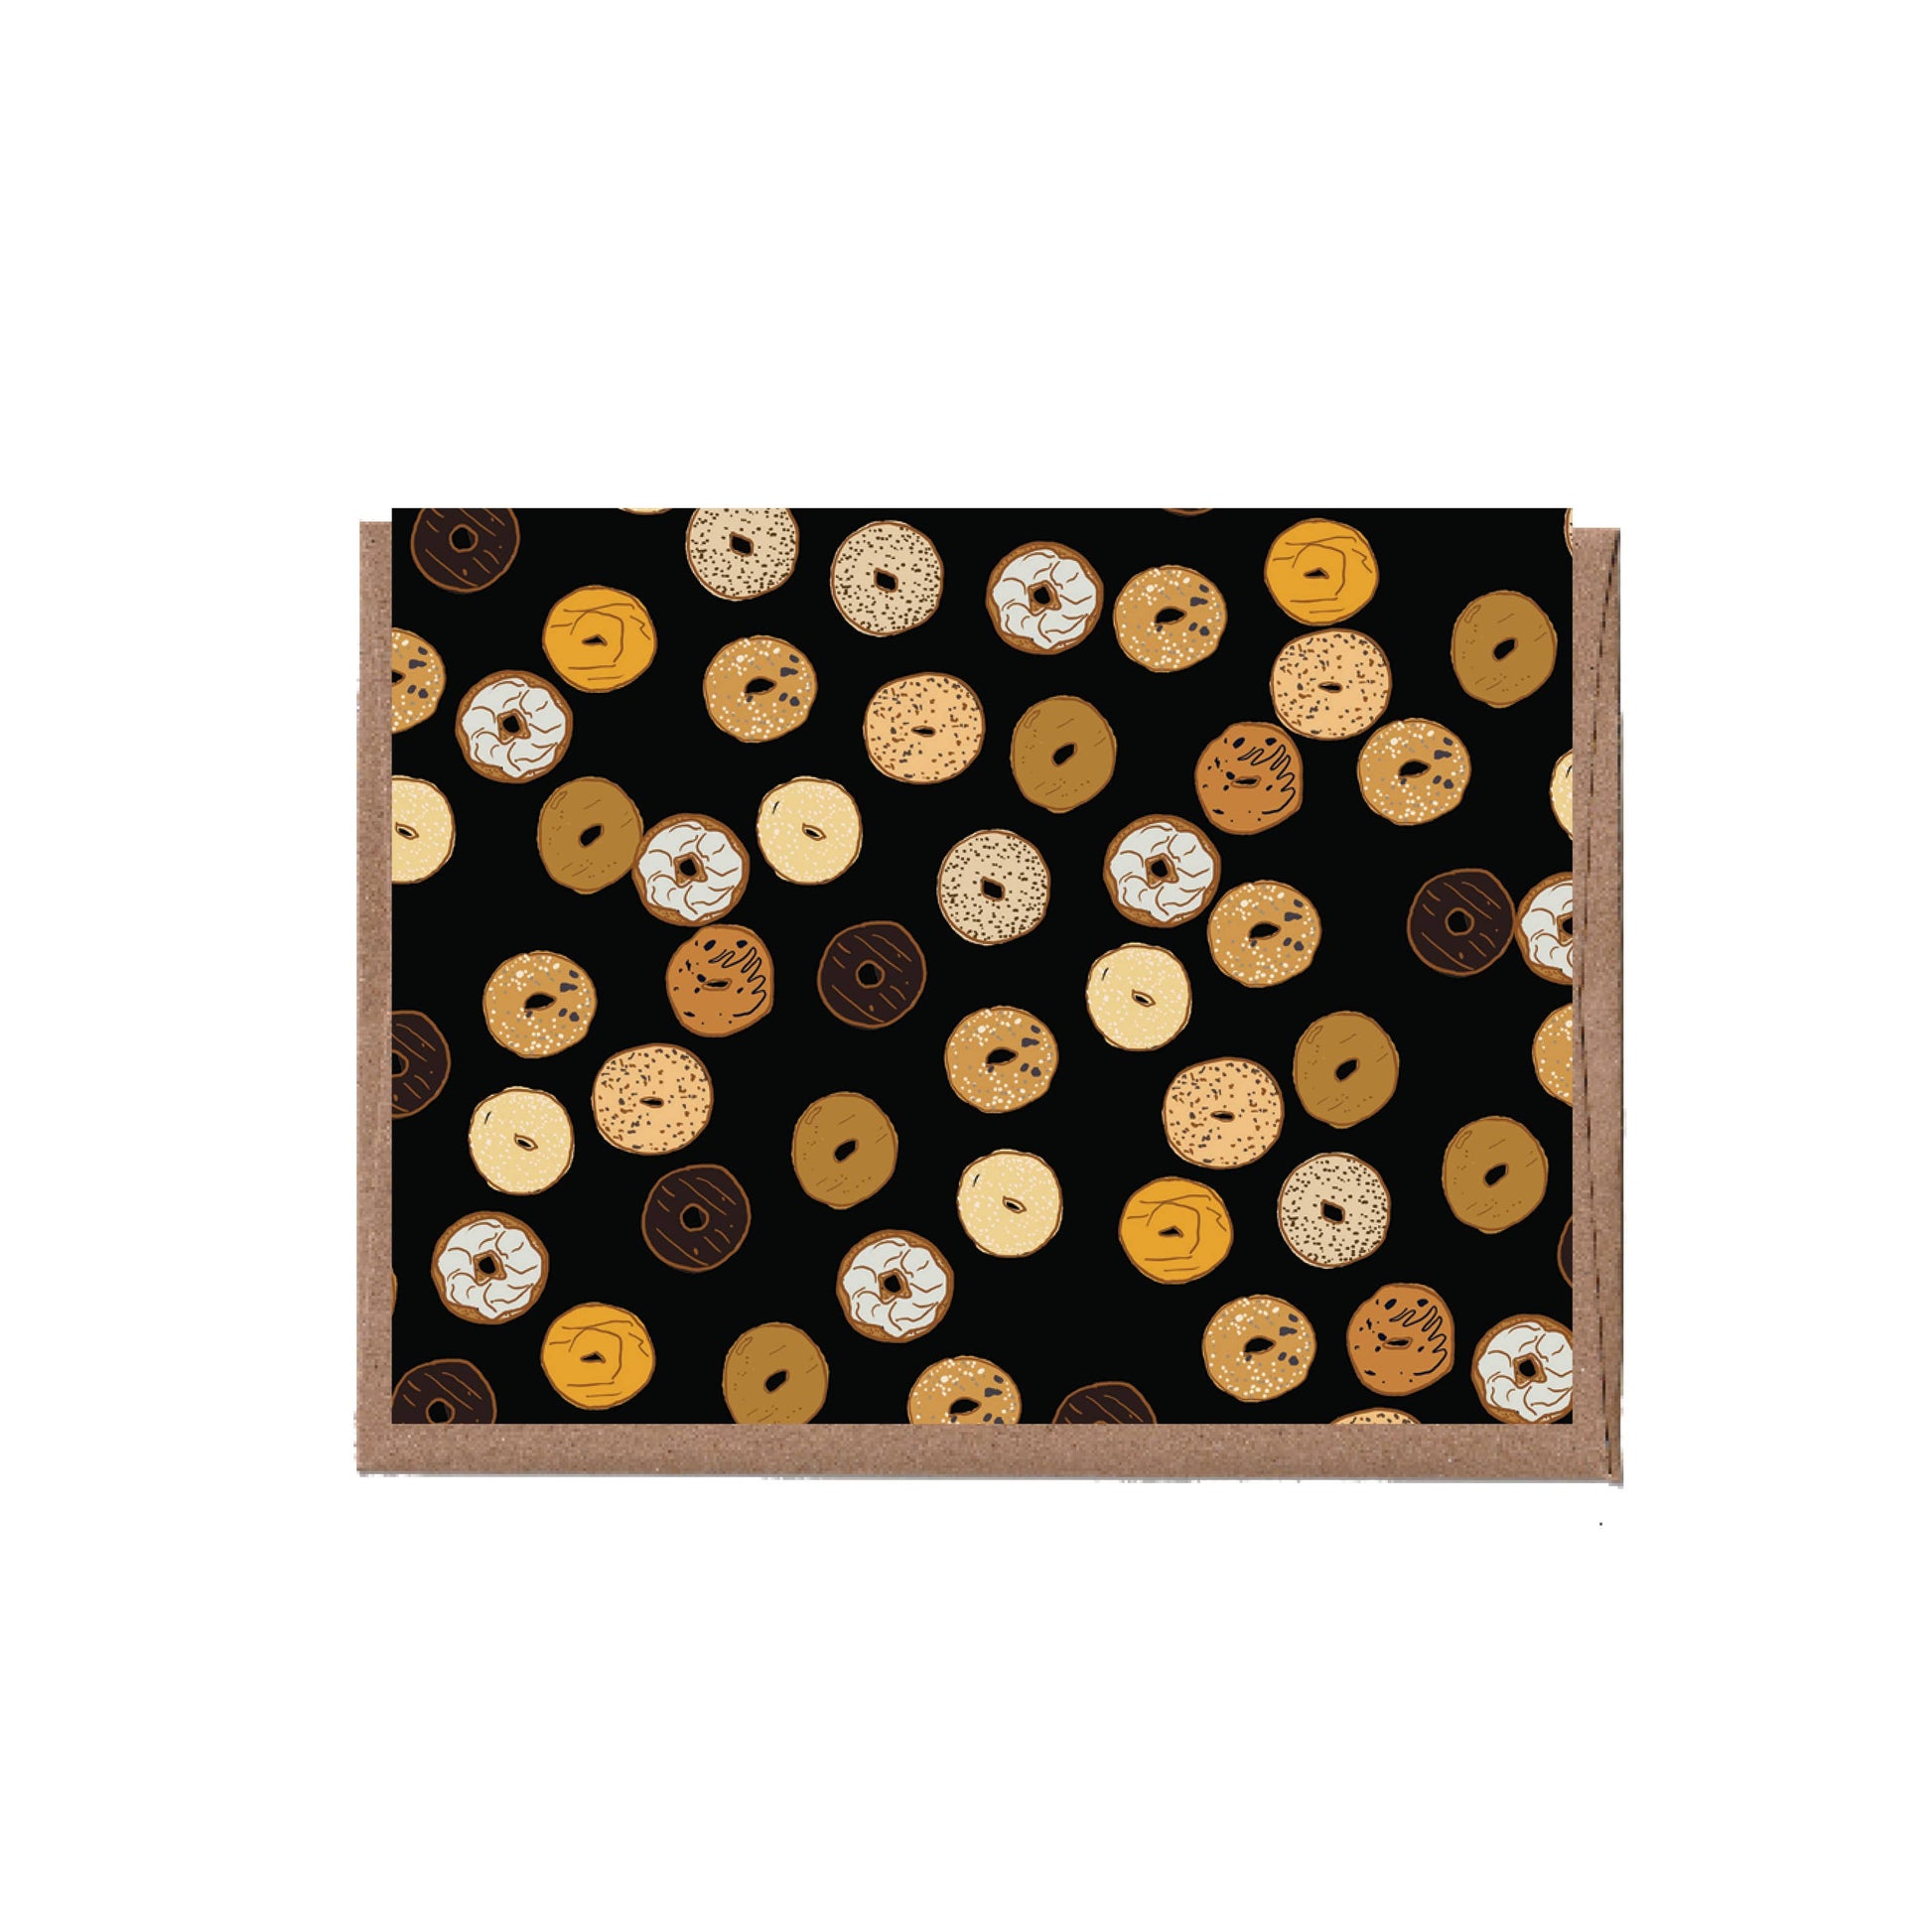 Greeting card with assorted bagels on the cover. Black background. Craft envelope.